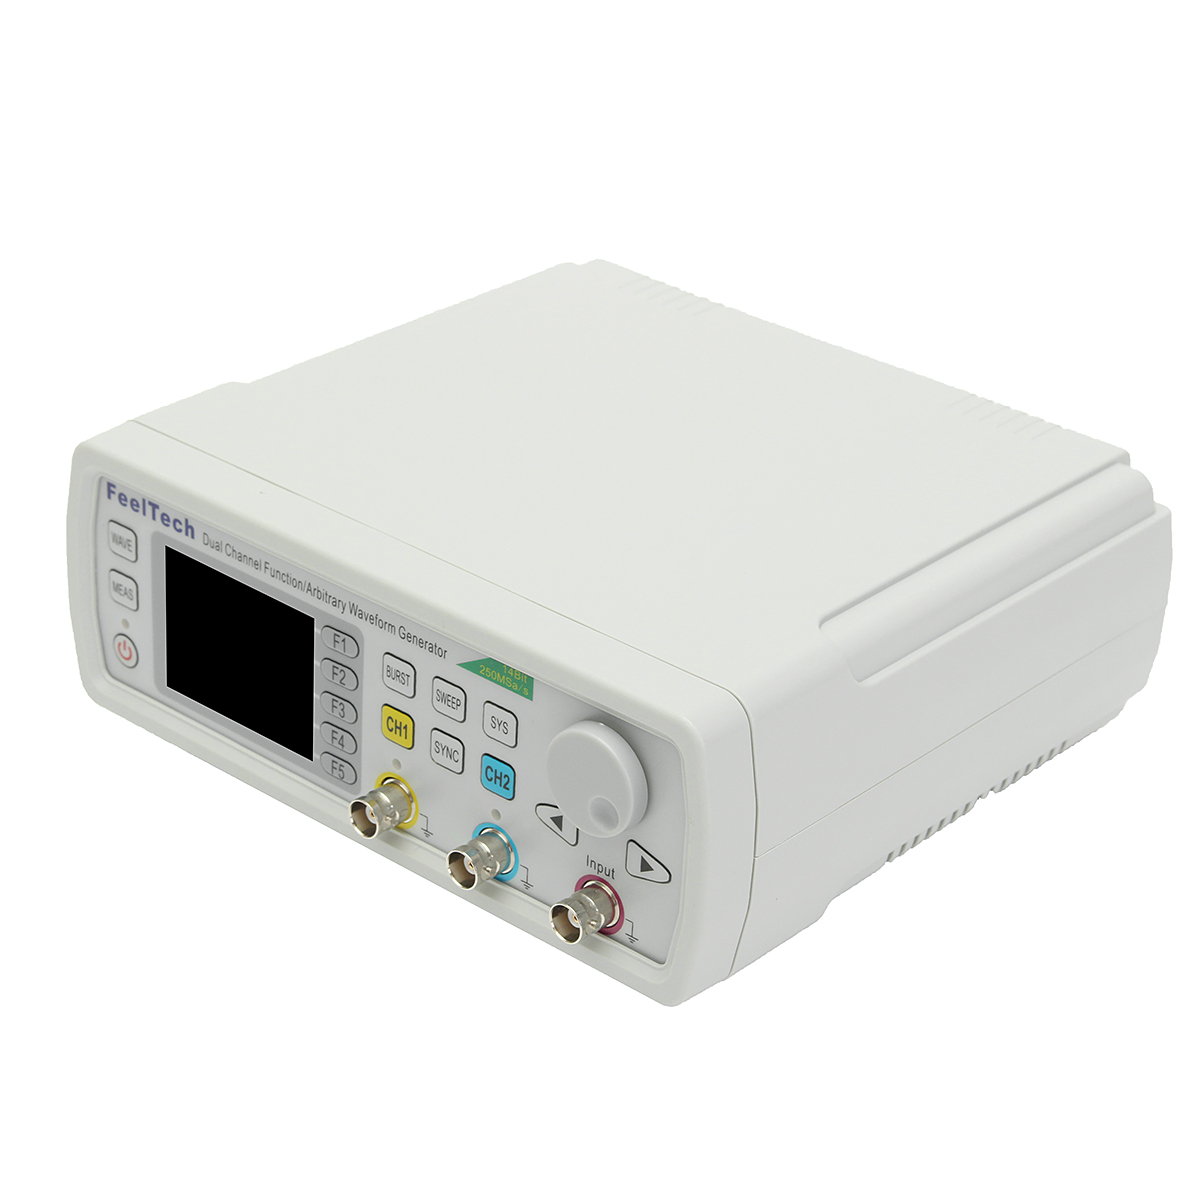 FY6600 Digital 12-60MHz Dual Channel DDS Function Arbitrary Waveform Signal Generator Frequency Meter 14